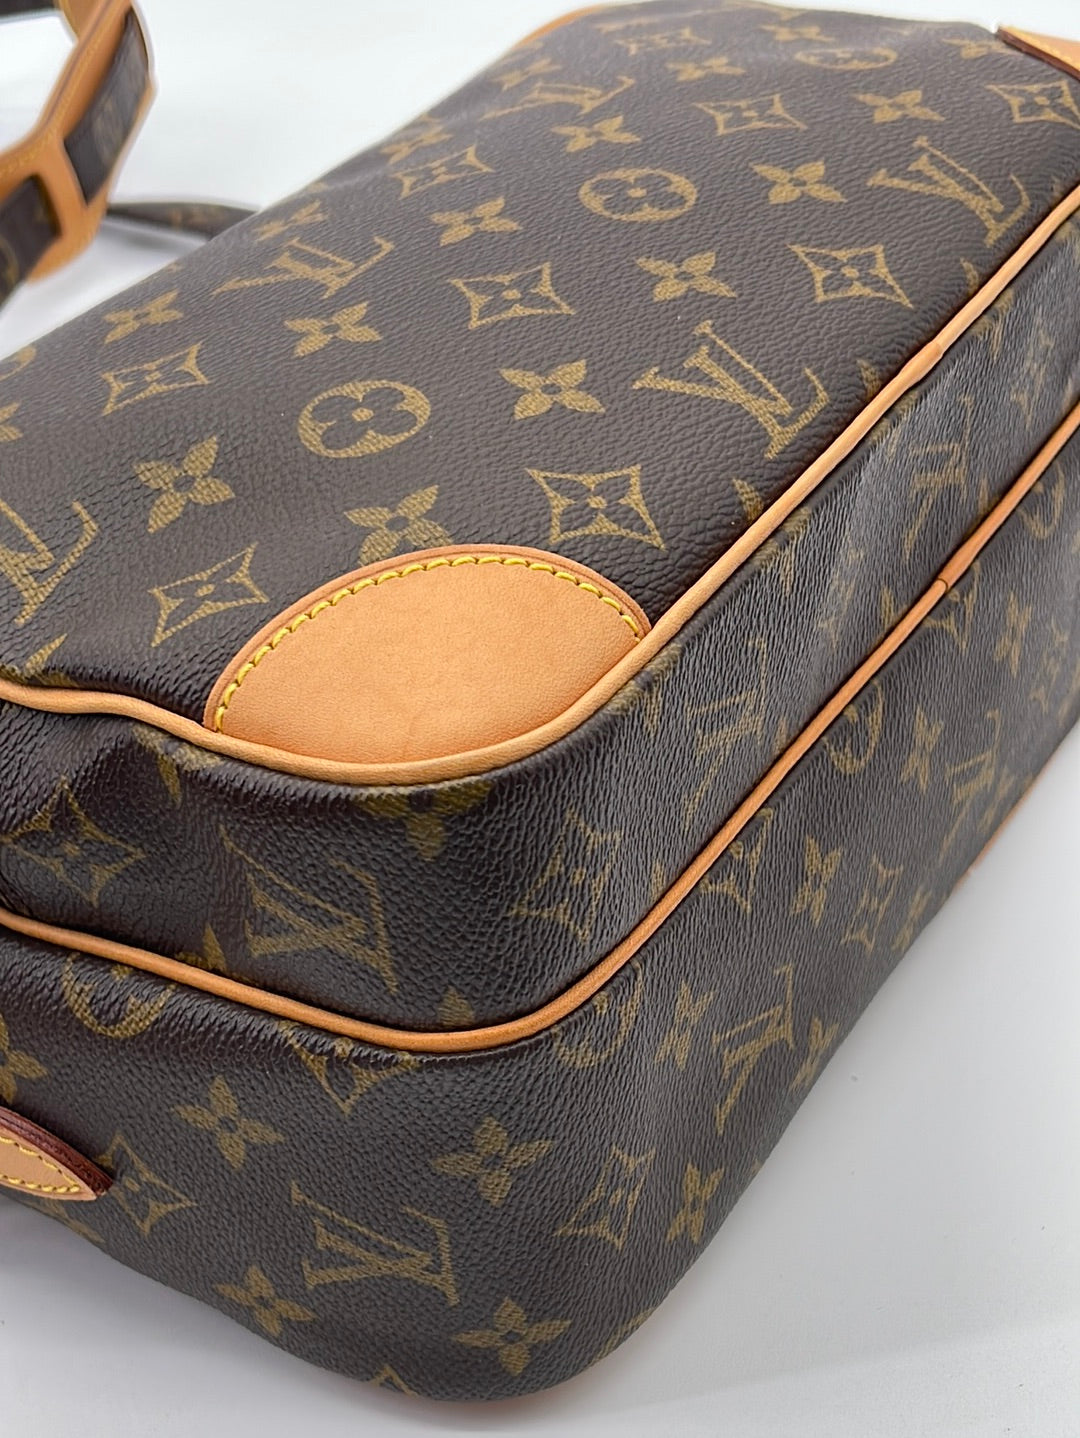 LOUIS VUITTON. Nile bag called of photographer in coated…